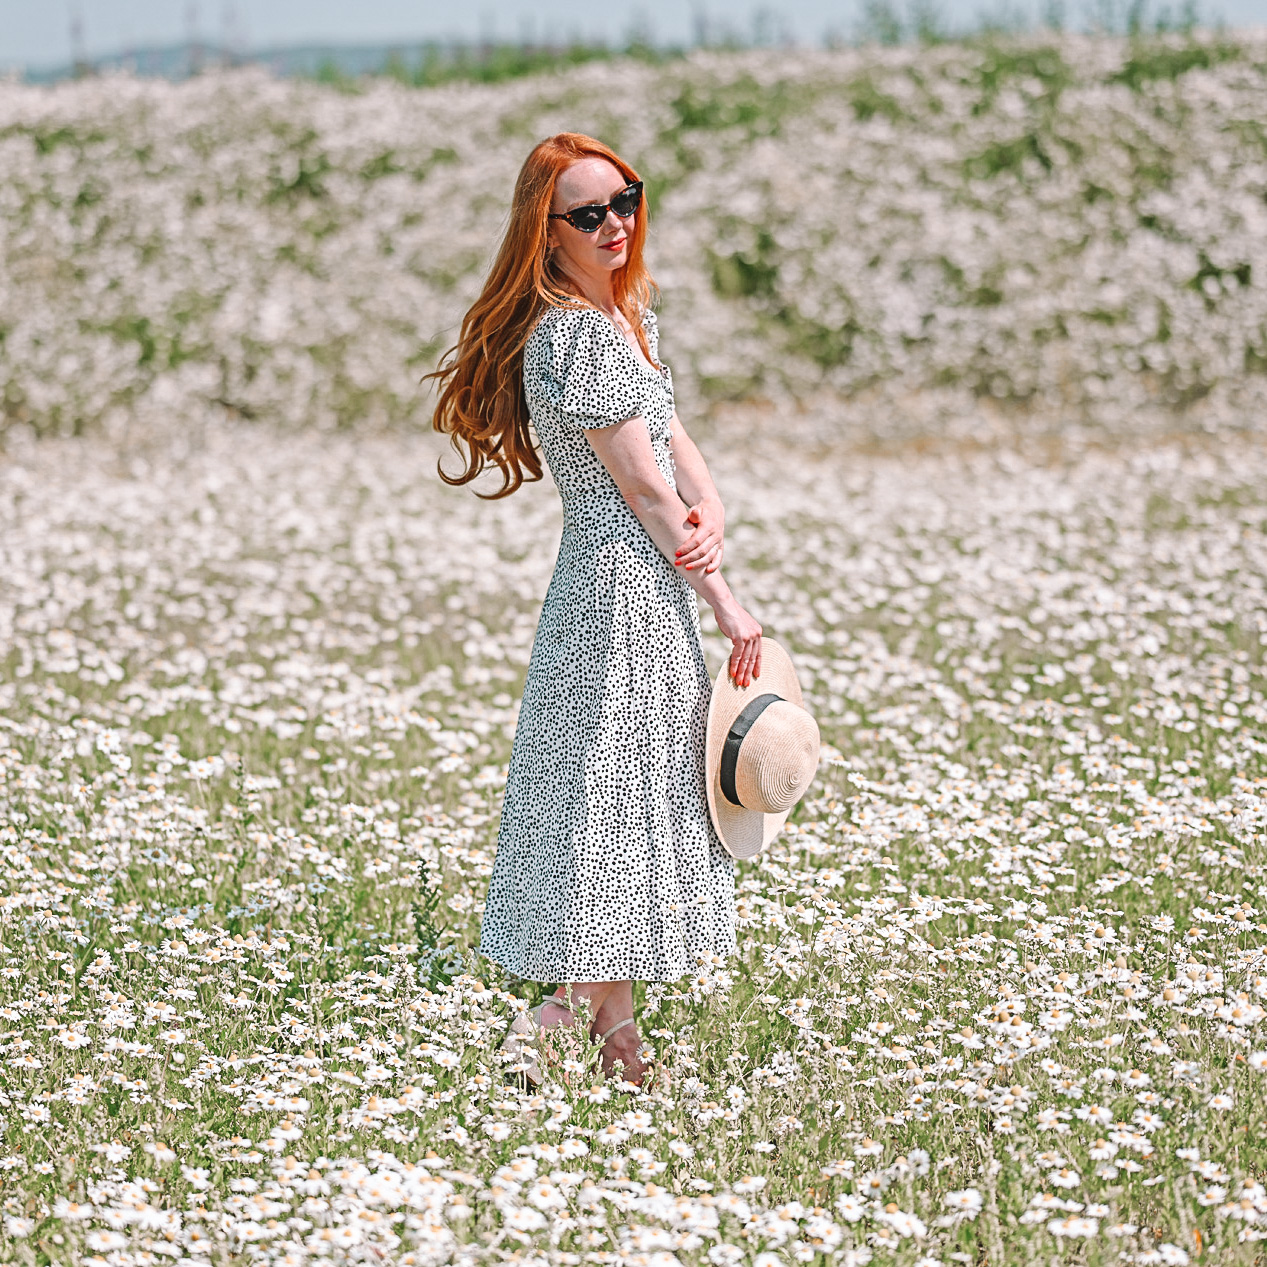 Amber standing in a field of Chamomile